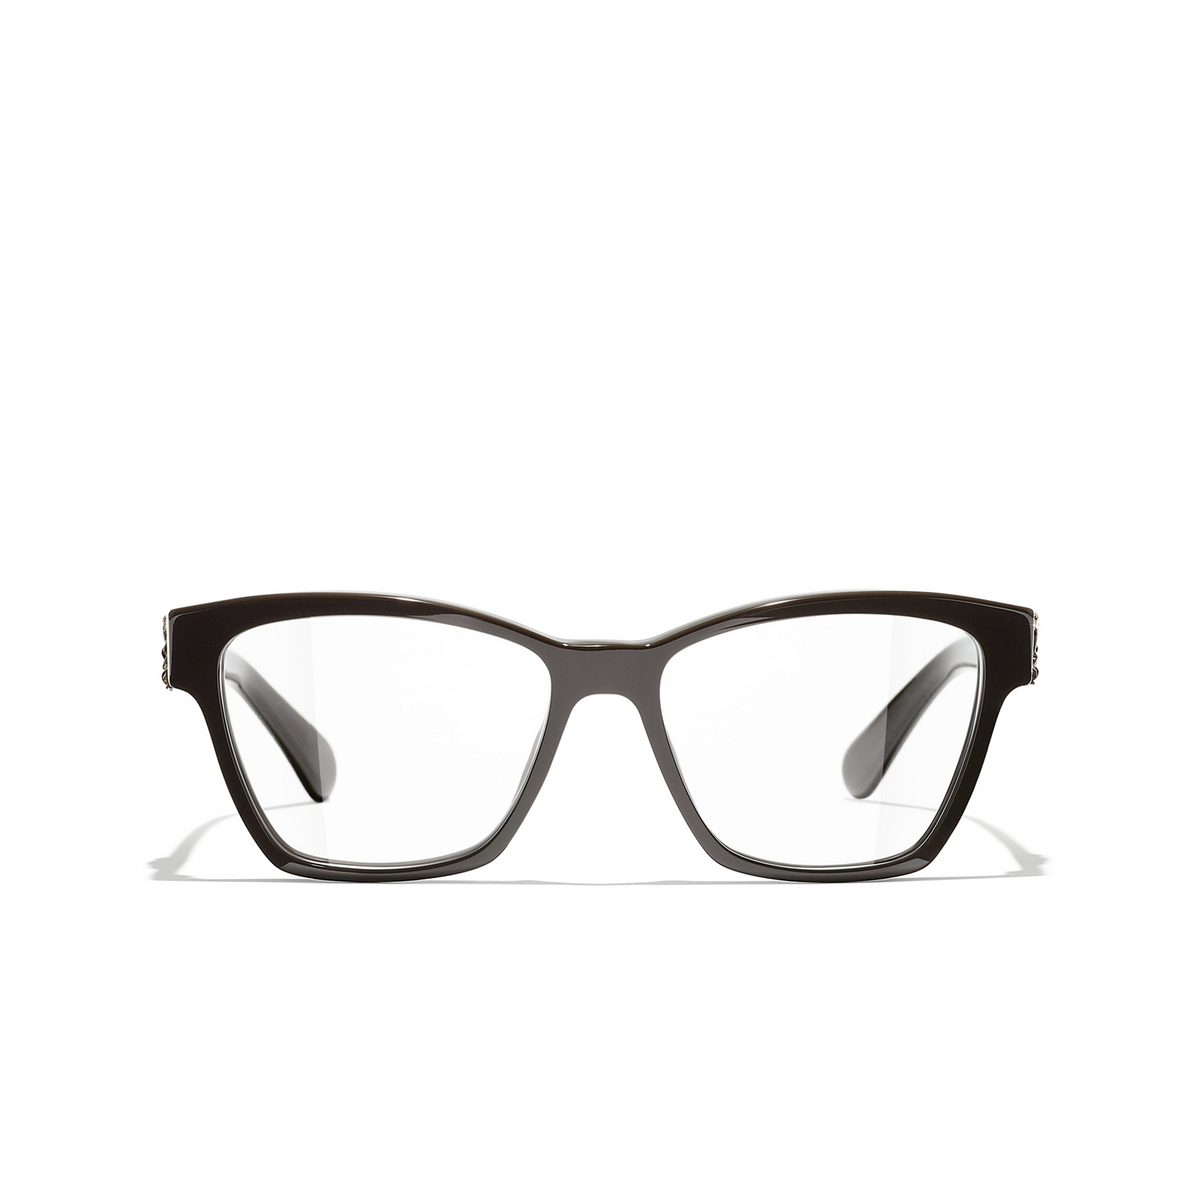 CHANEL cateye Eyeglasses 1460 Brown - front view